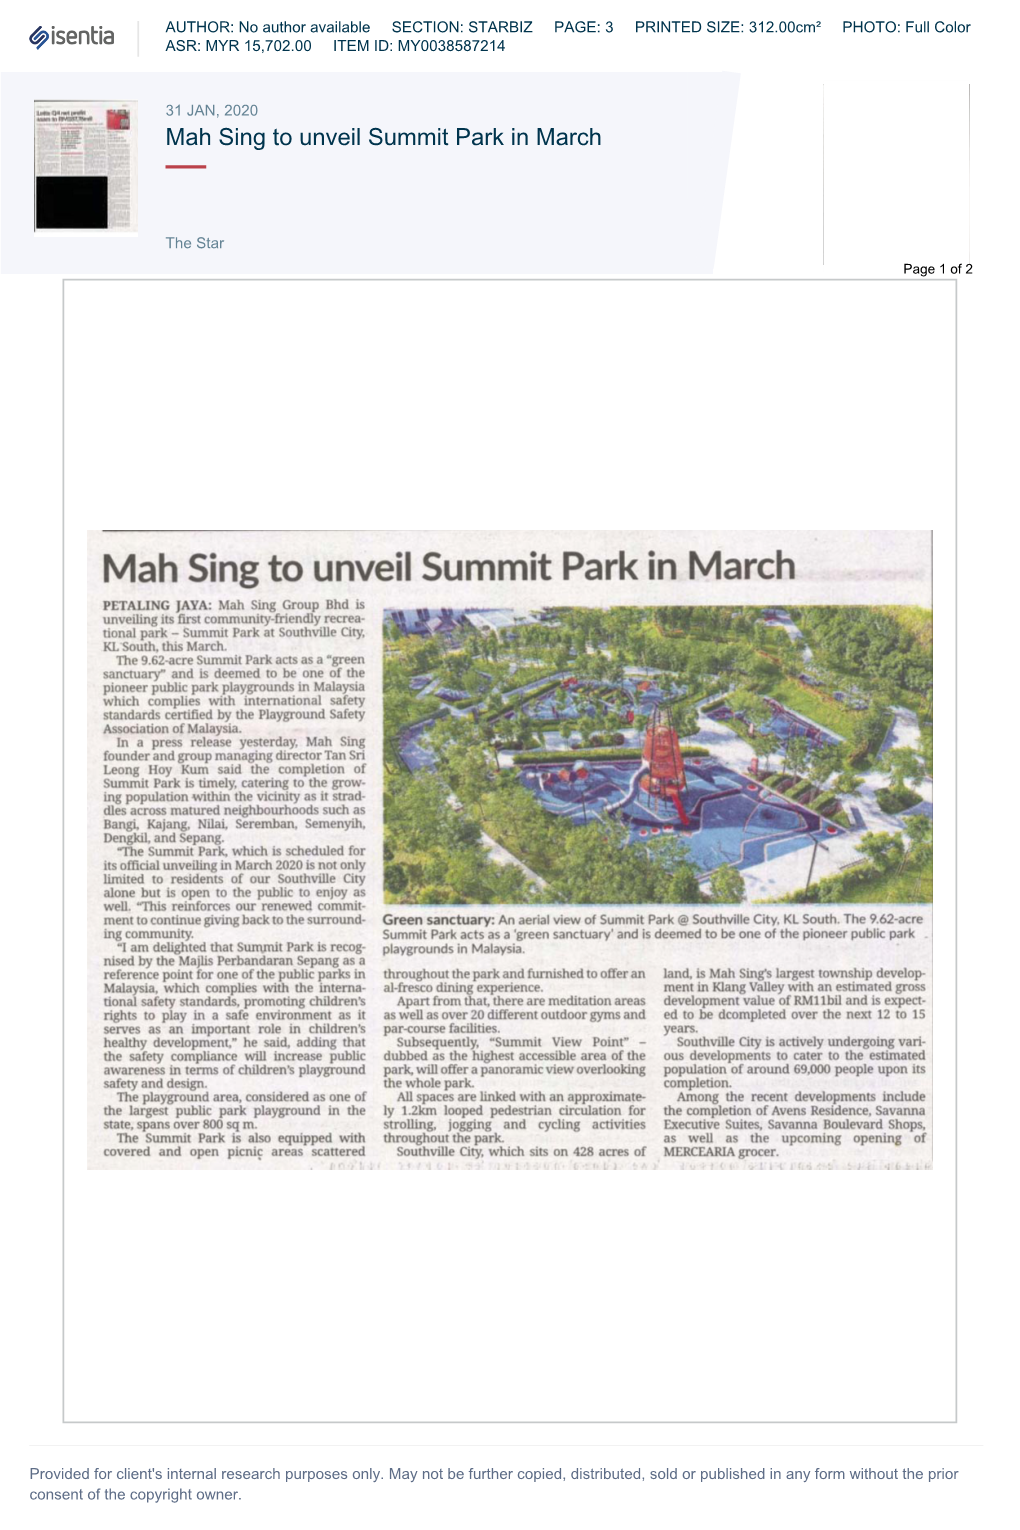 Mah Sing to Unveil Summit Park in March